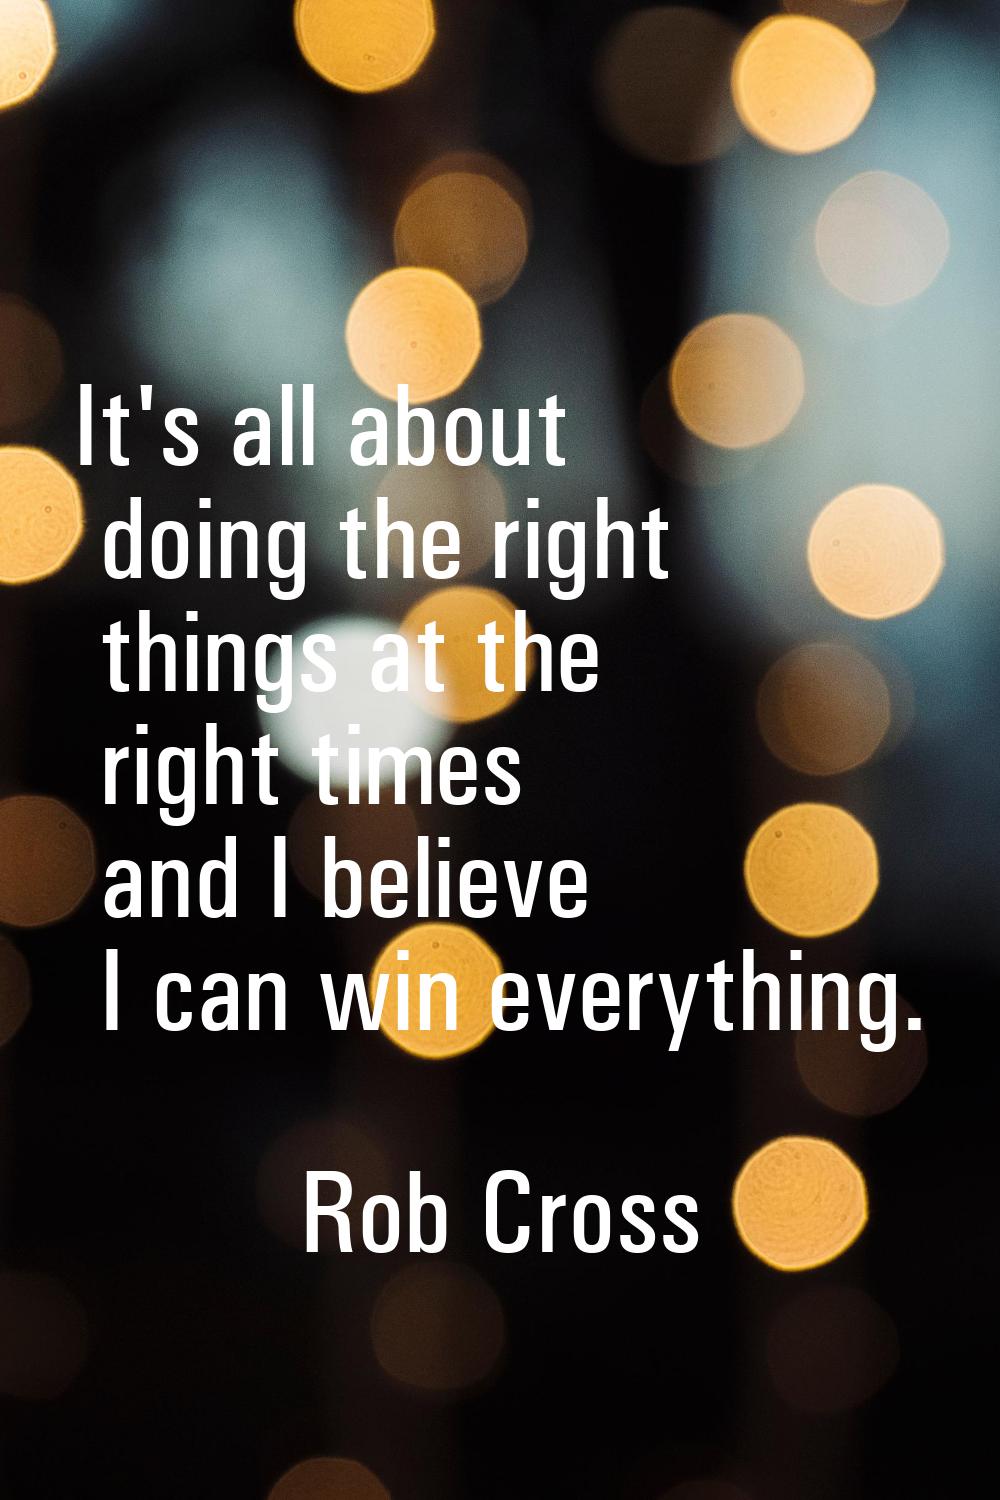 It's all about doing the right things at the right times and I believe I can win everything.